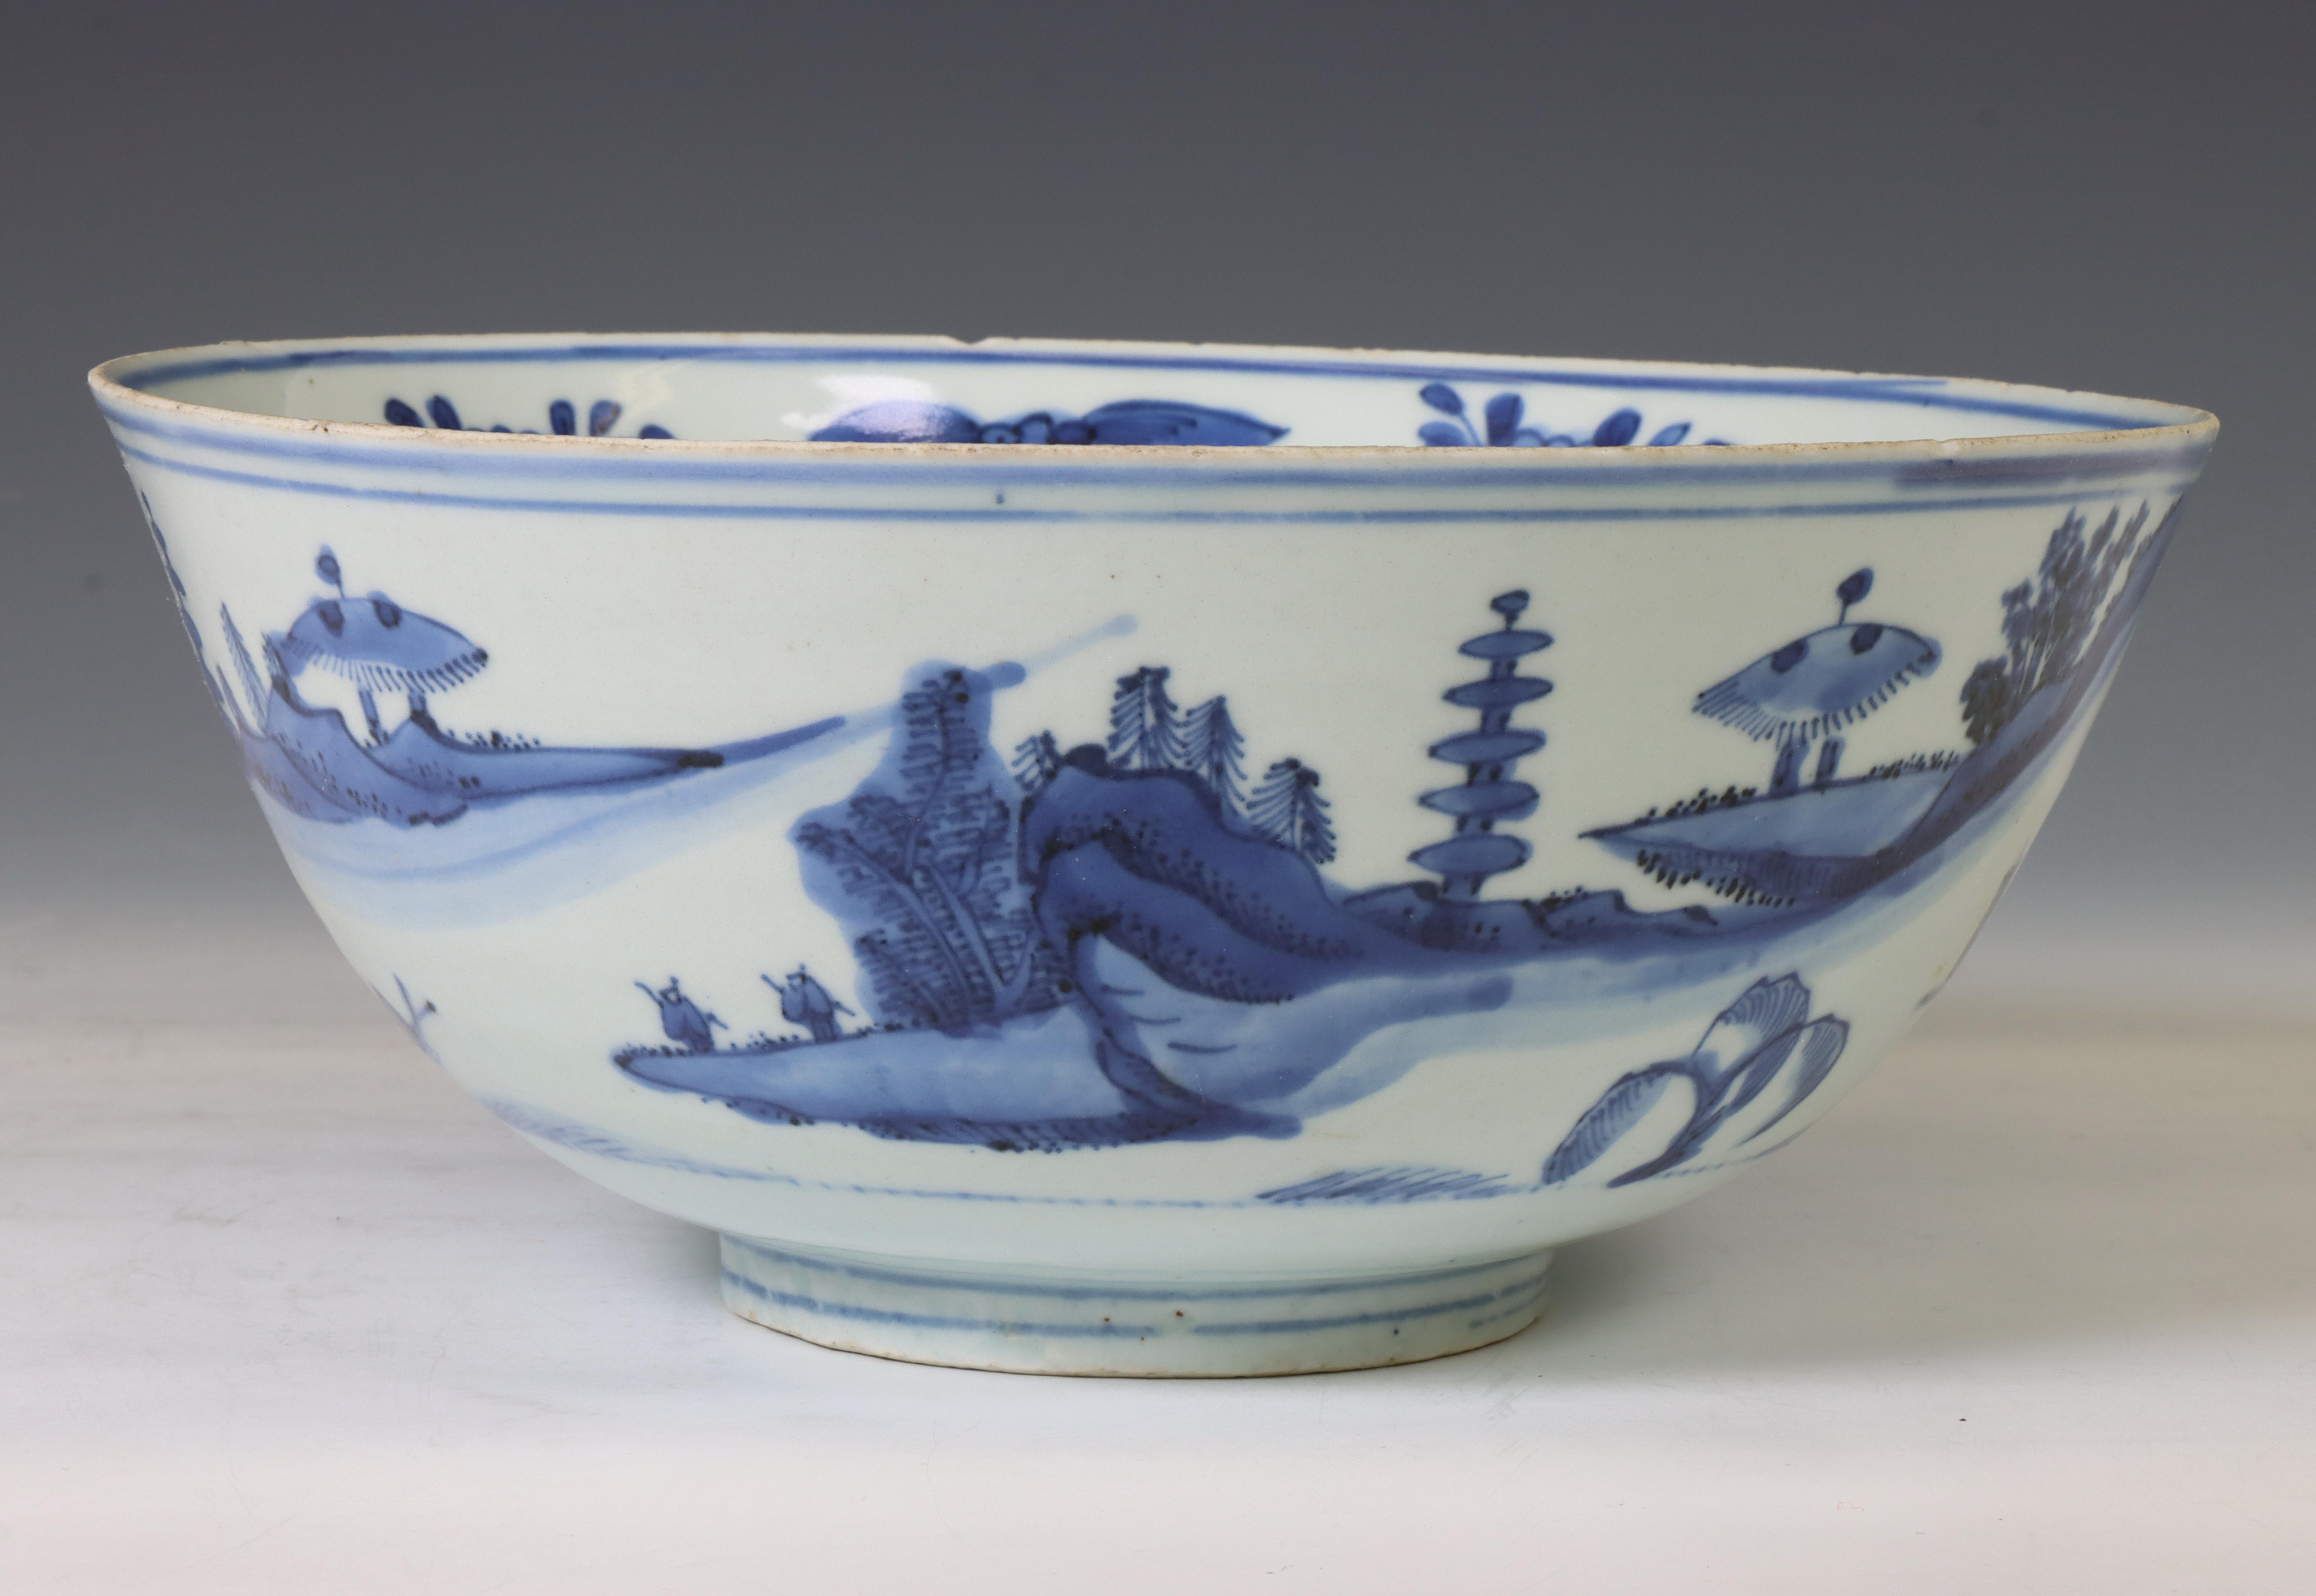 China, blue and white porcelain bowl, 17th century, - Image 2 of 2